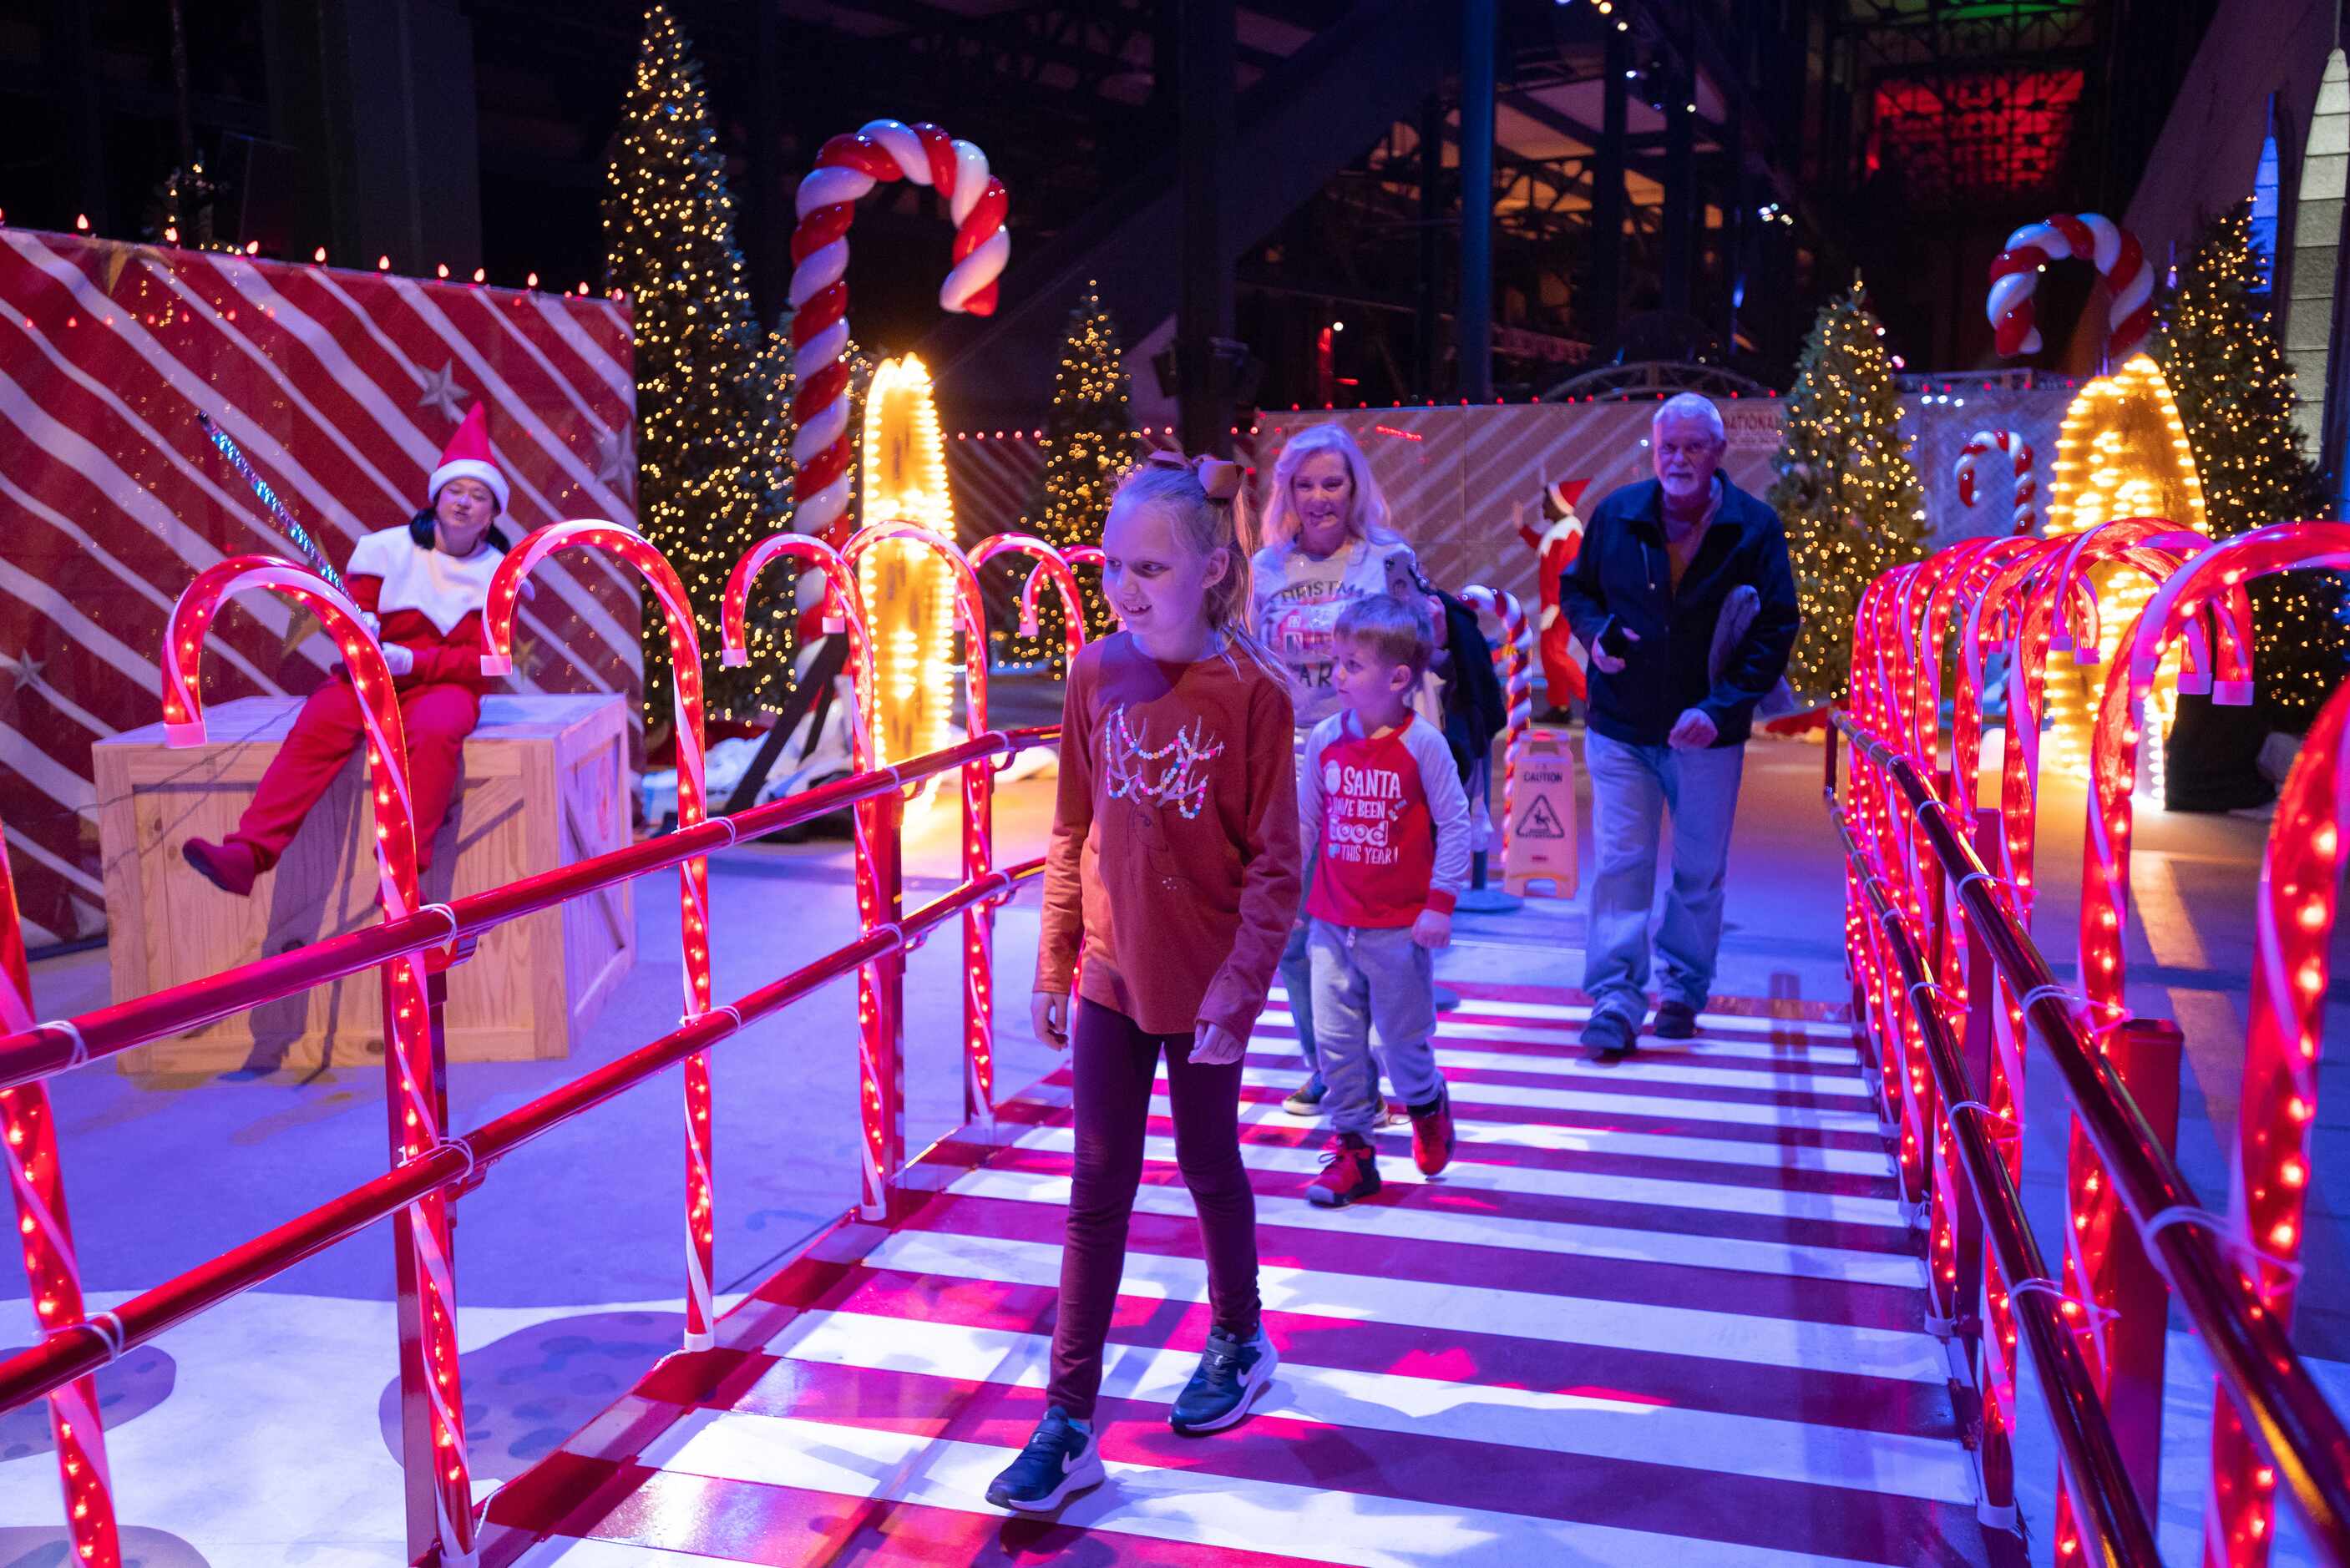 Families can walk through the "Elf on the Shelf" Magical Holiday Journey immersive exhibit...